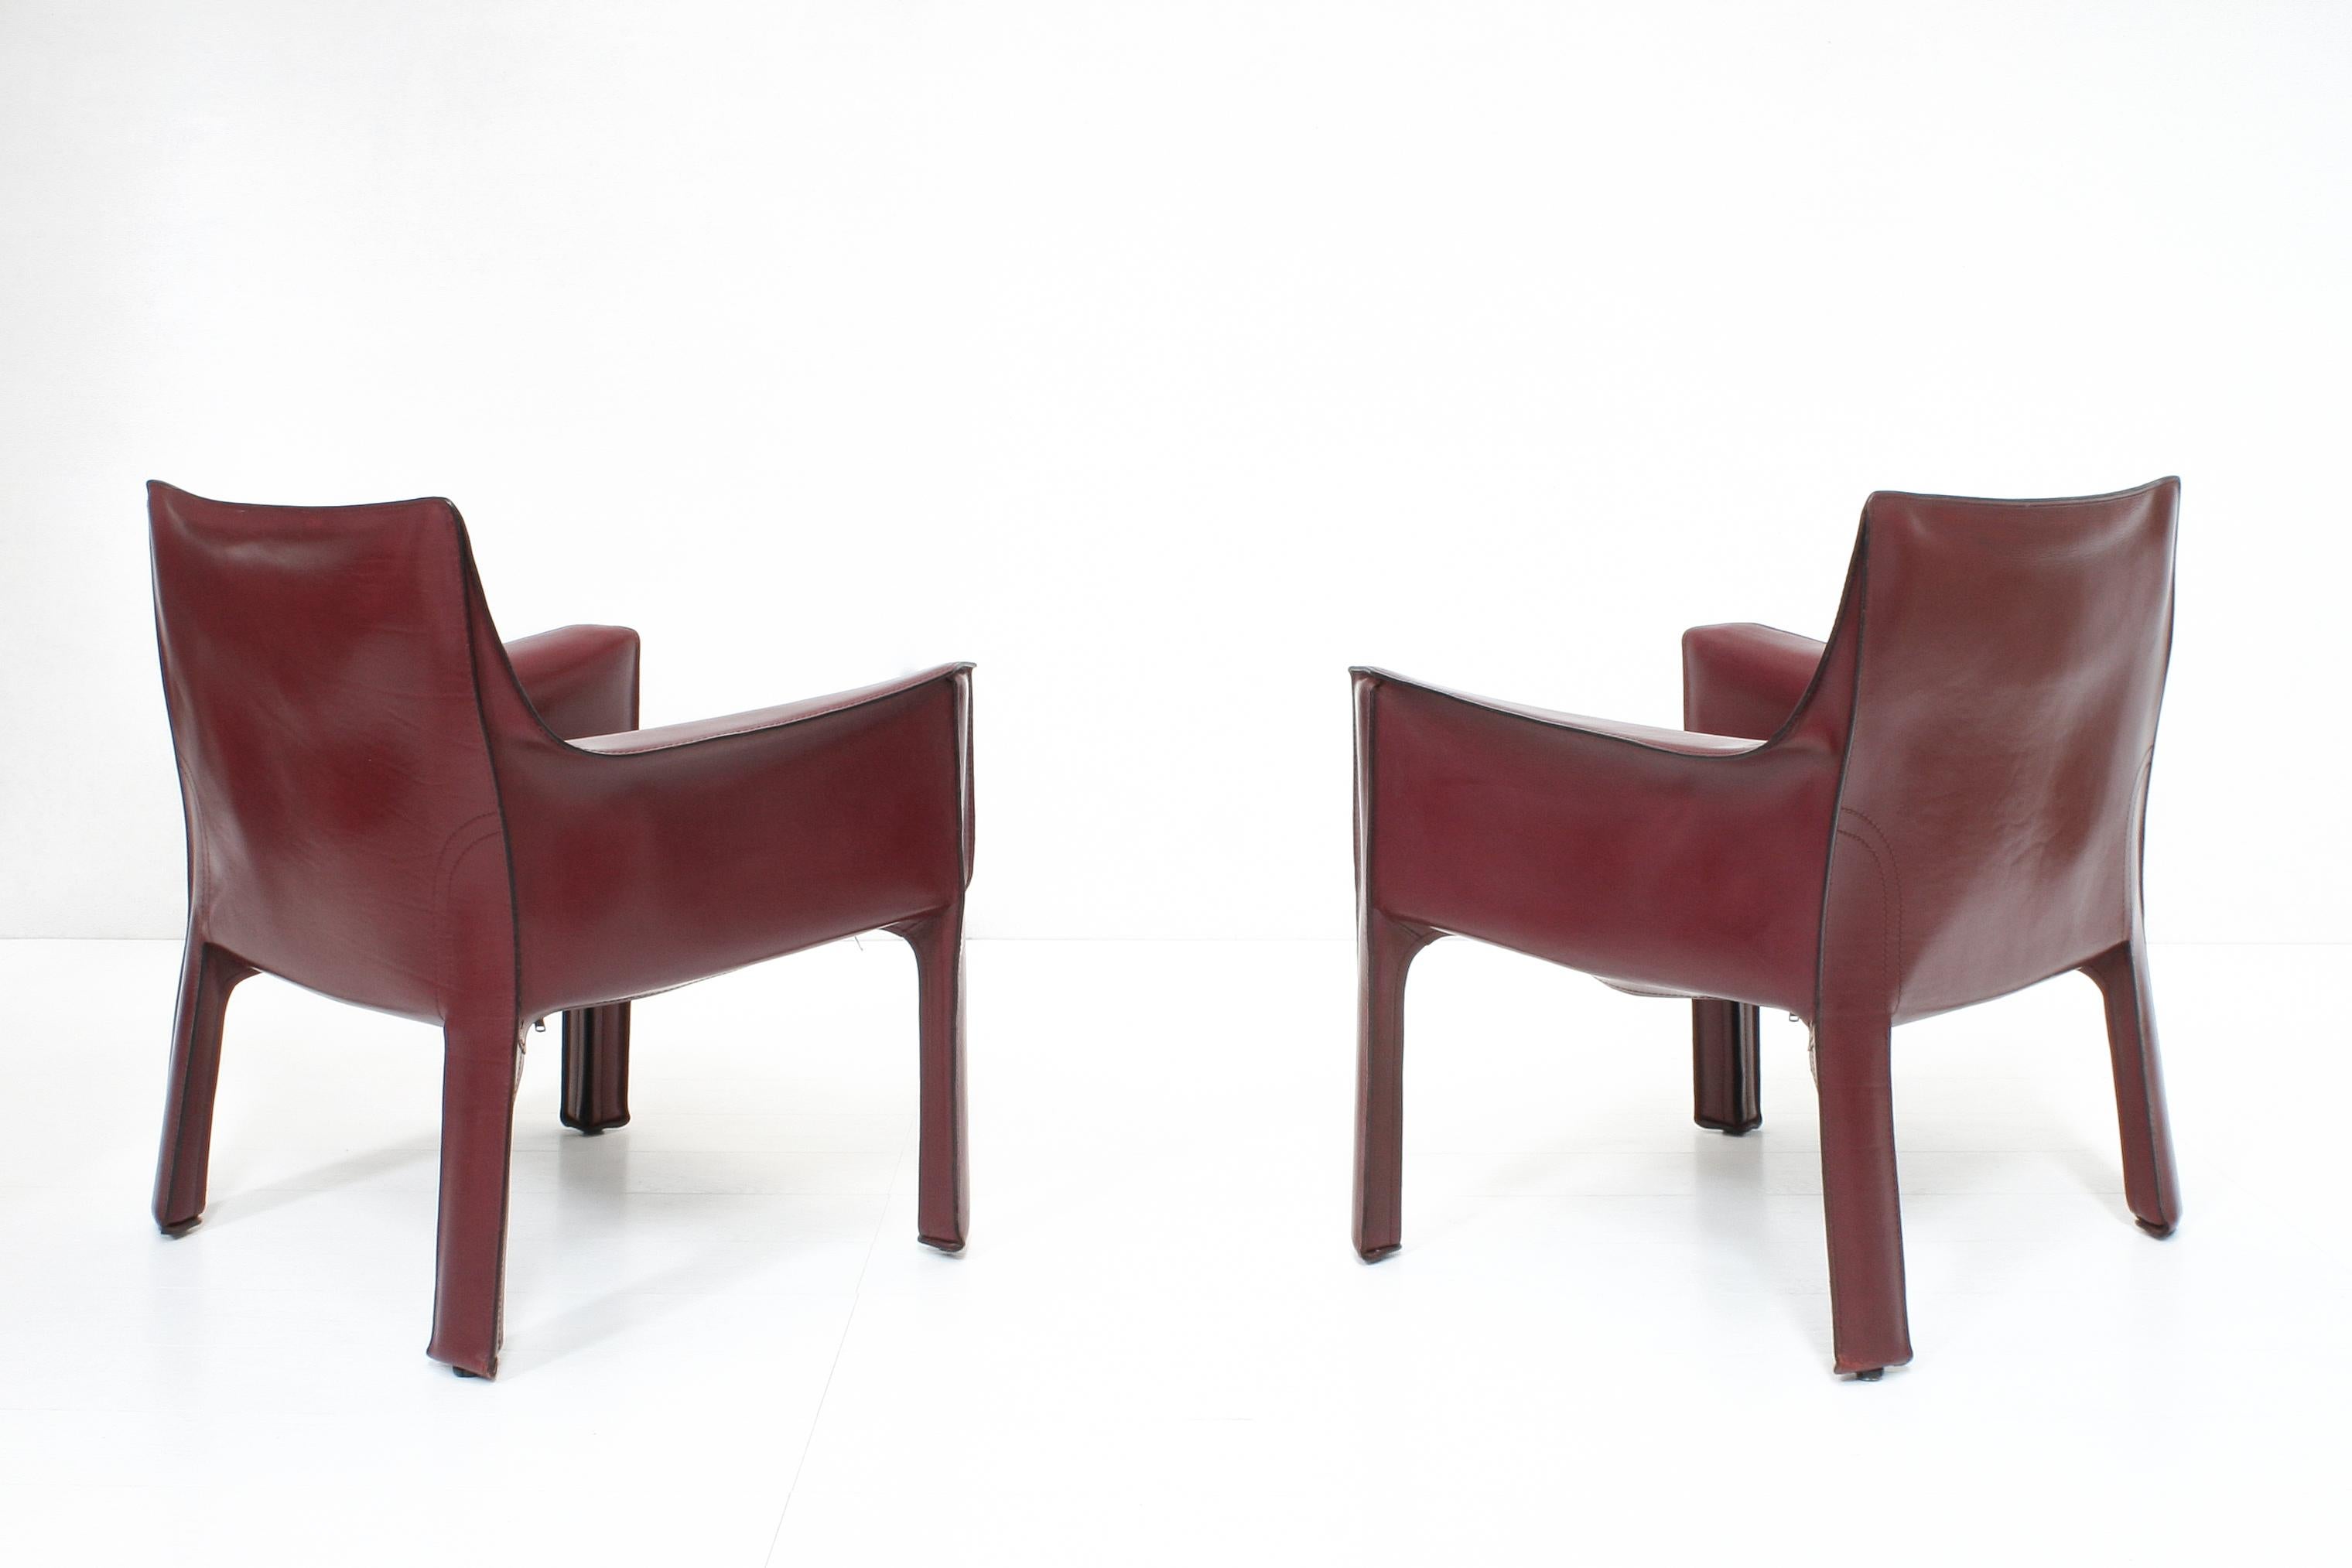 These more rare, lower lounge versions of the well known CAB chair is executed in striking oxblood red leather and designed by Mario Belline for Cassina.